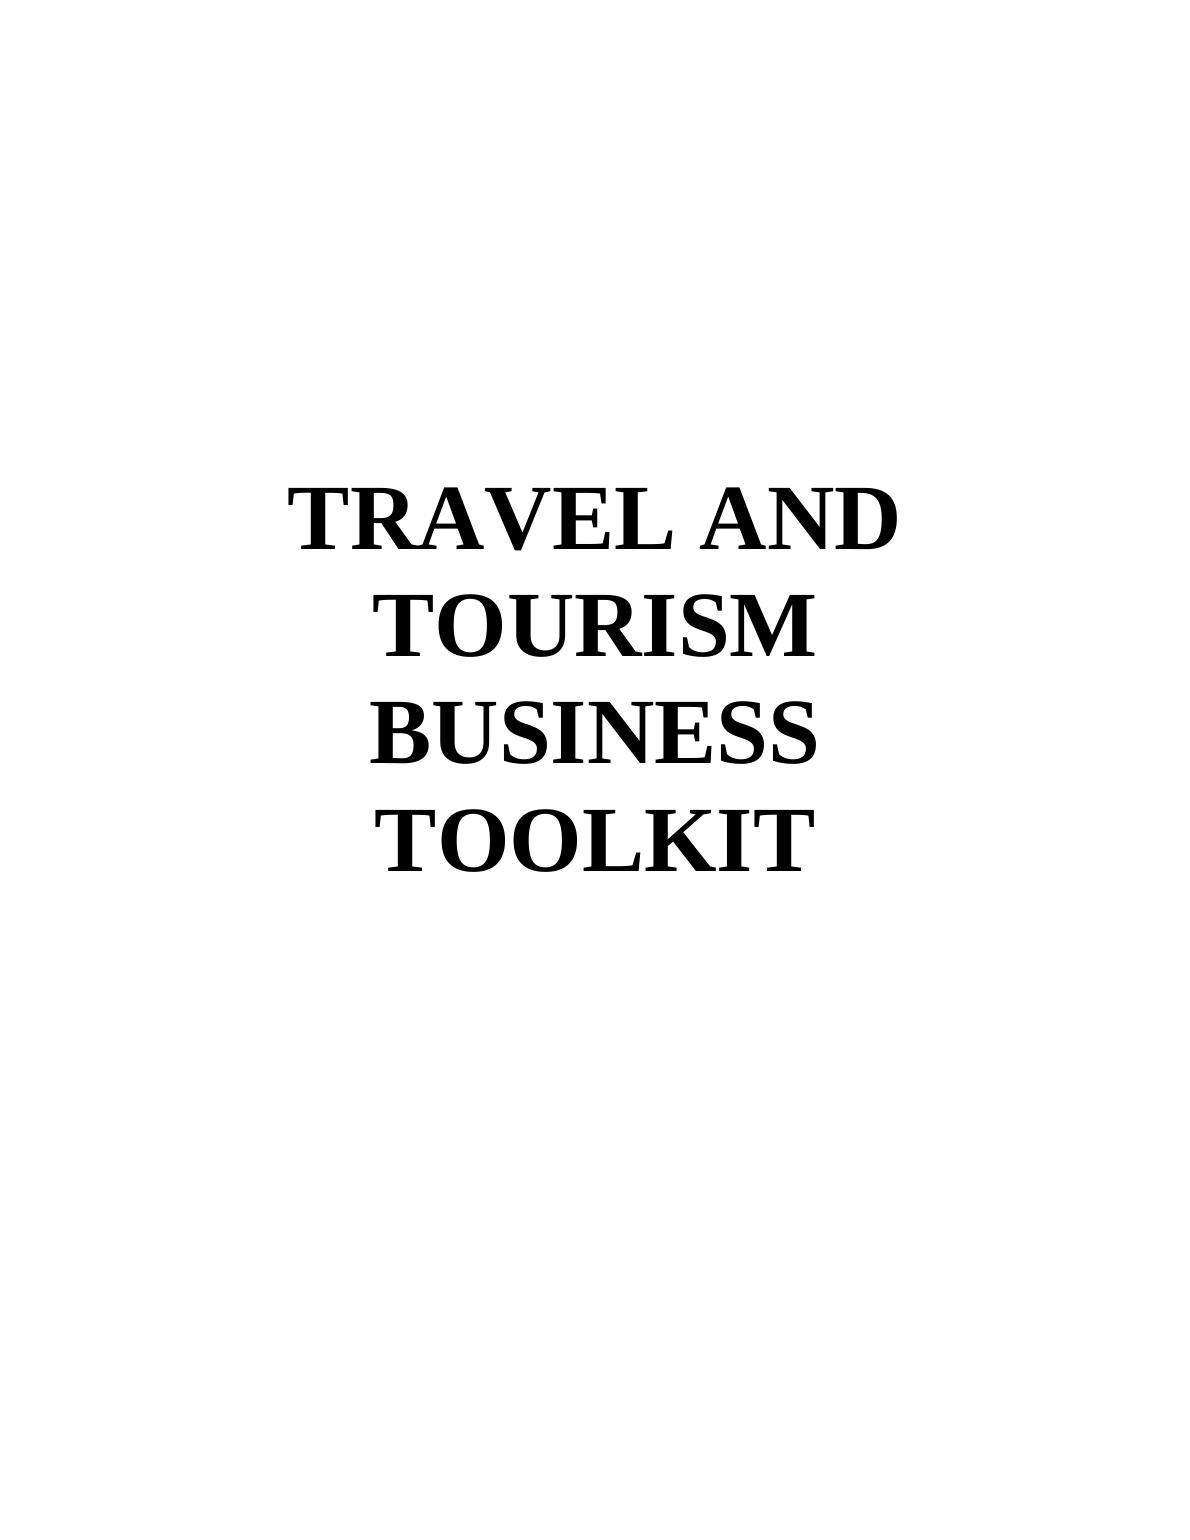 Travel And Tourism Business Toolkit Assignment (Doc)_1